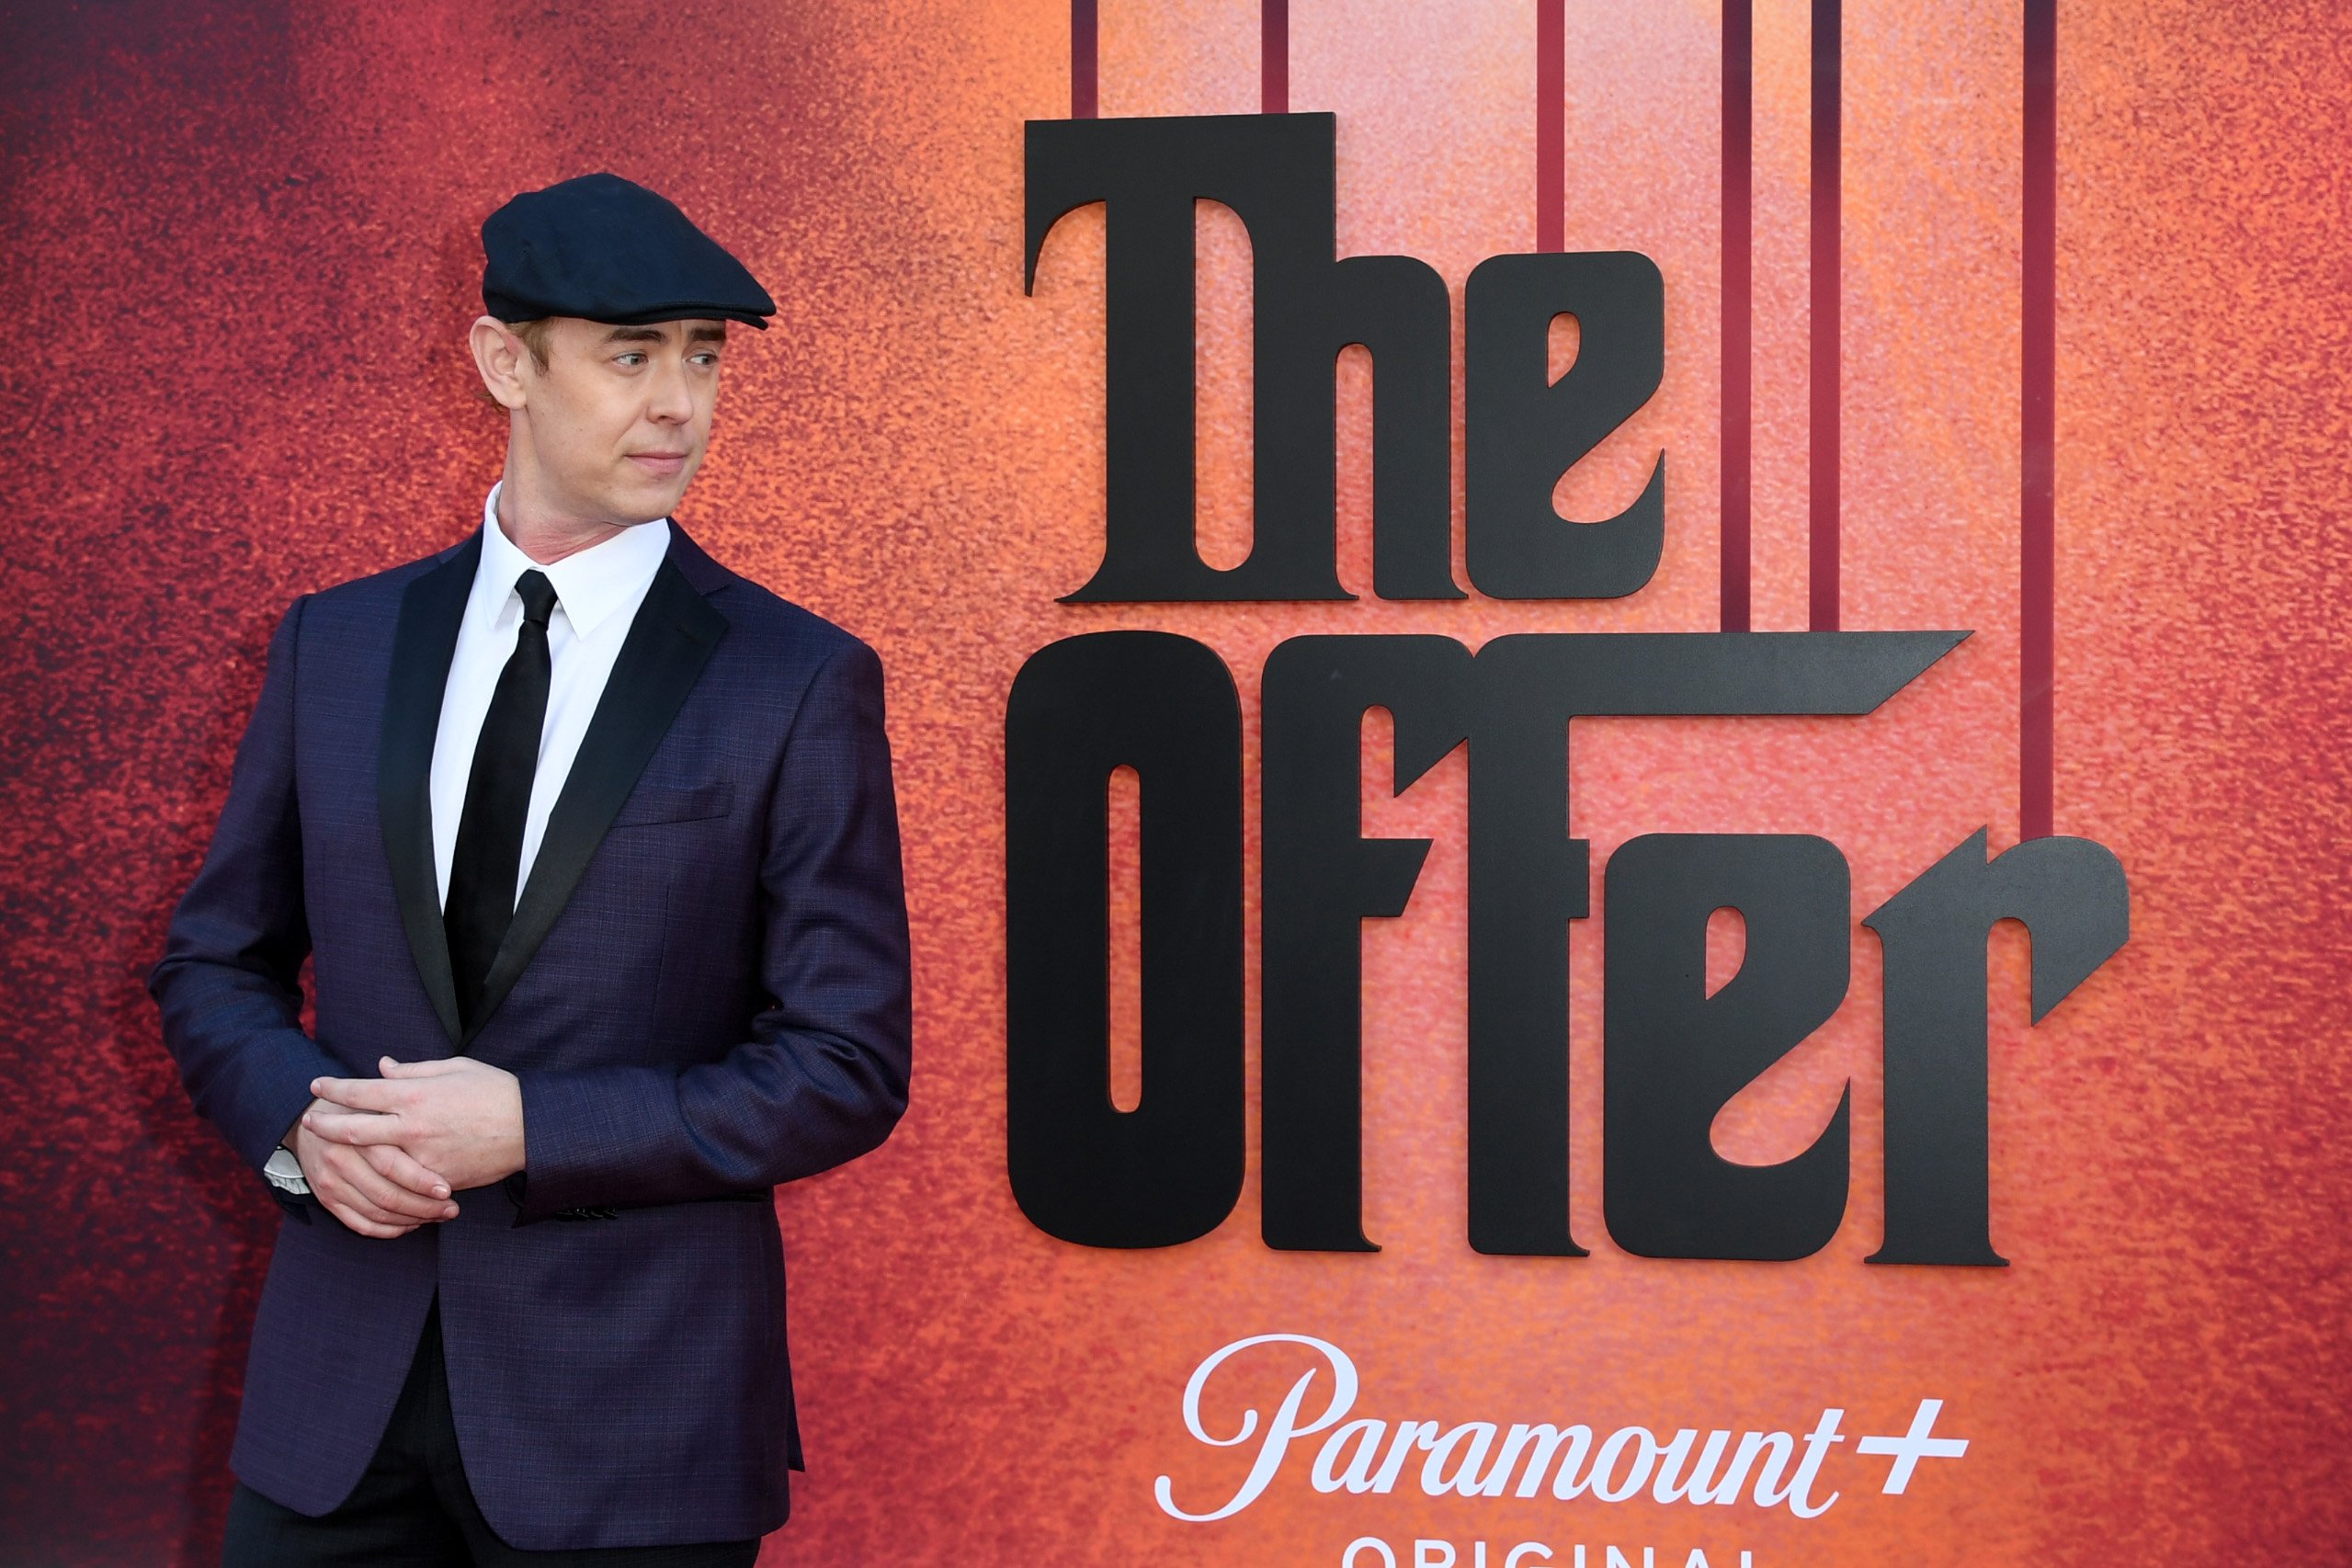 Colin Hanks is posing at the premiere for the Paramount+ new series "The Offer" in Los Angeles | Source: Getty Images